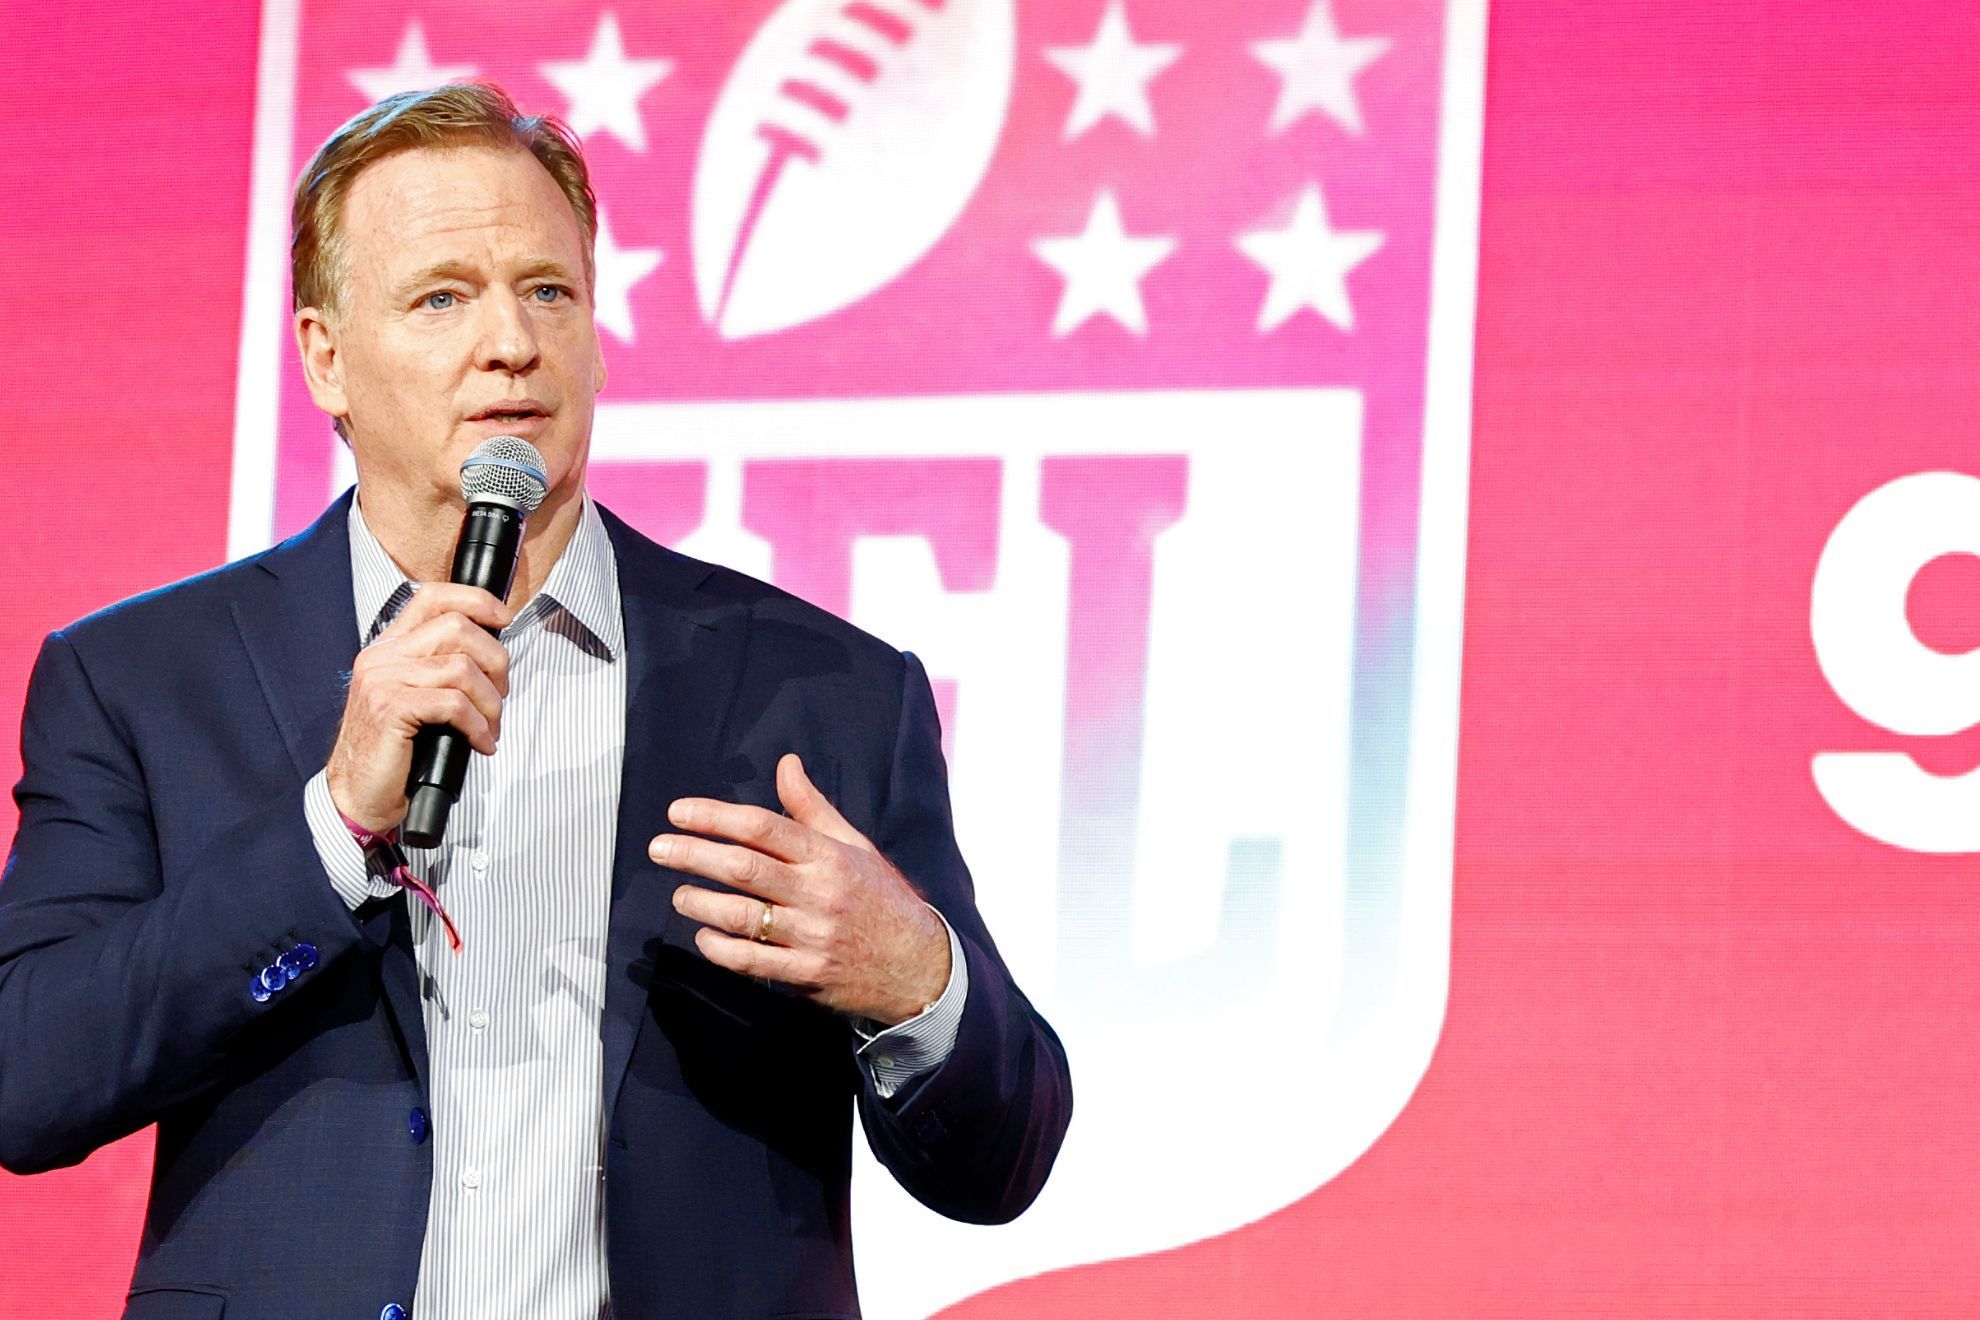 NFL commissioner Roger Goodell to sign contract extension